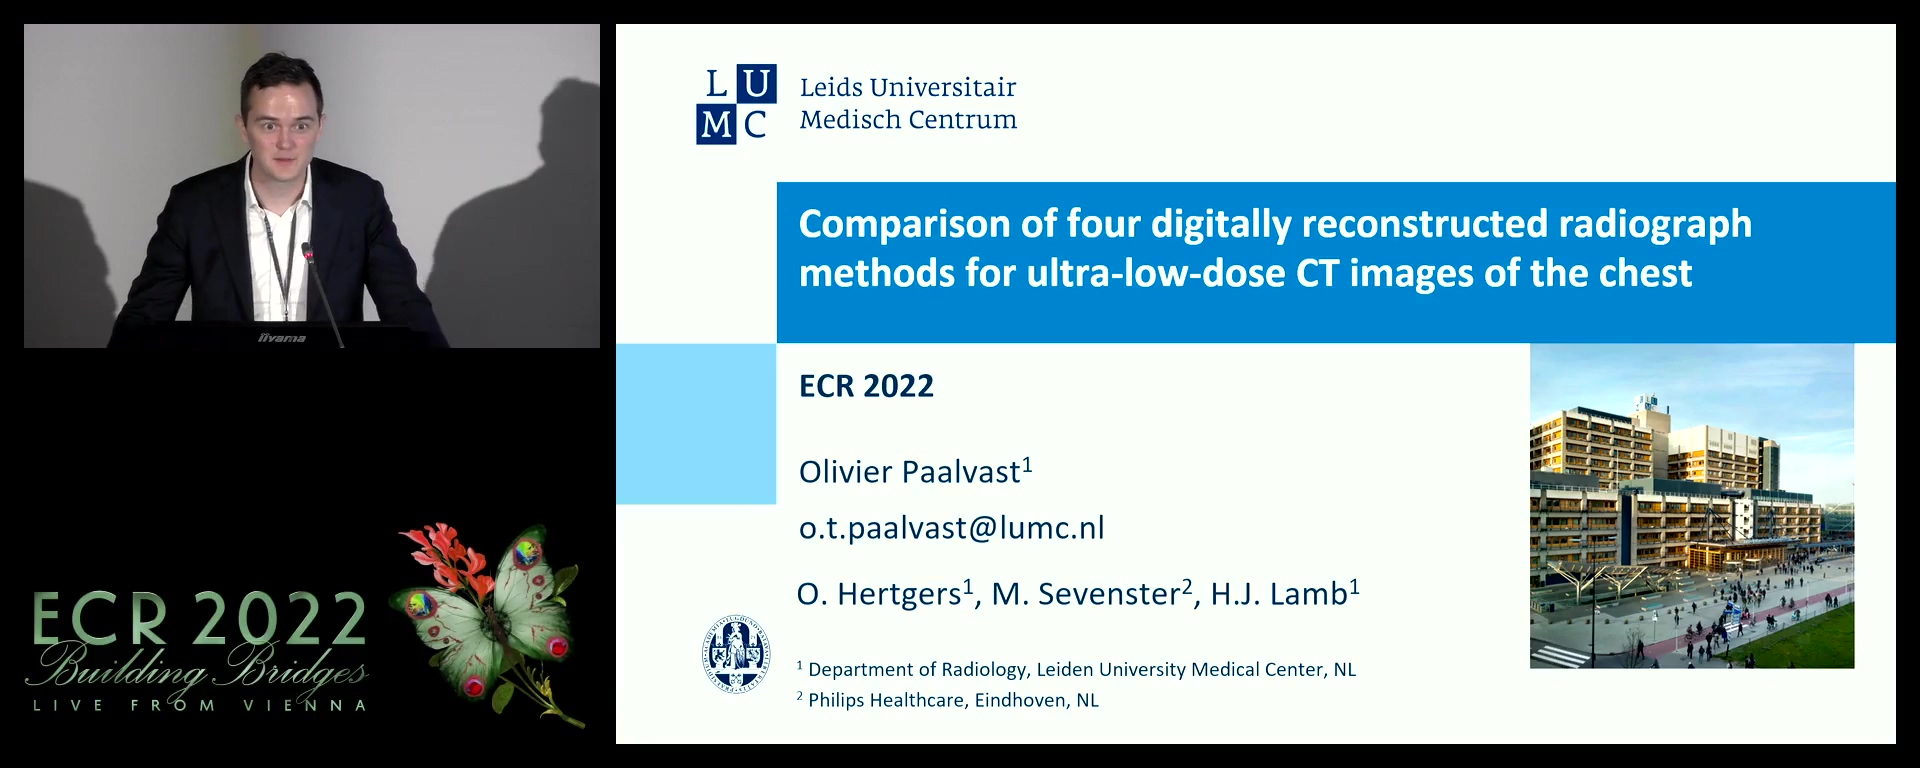 Comparison of three digitally reconstructed radiograph models for ultra-low-dose CT images of the chest - Olivier Paalvast, Amsterdam / NL